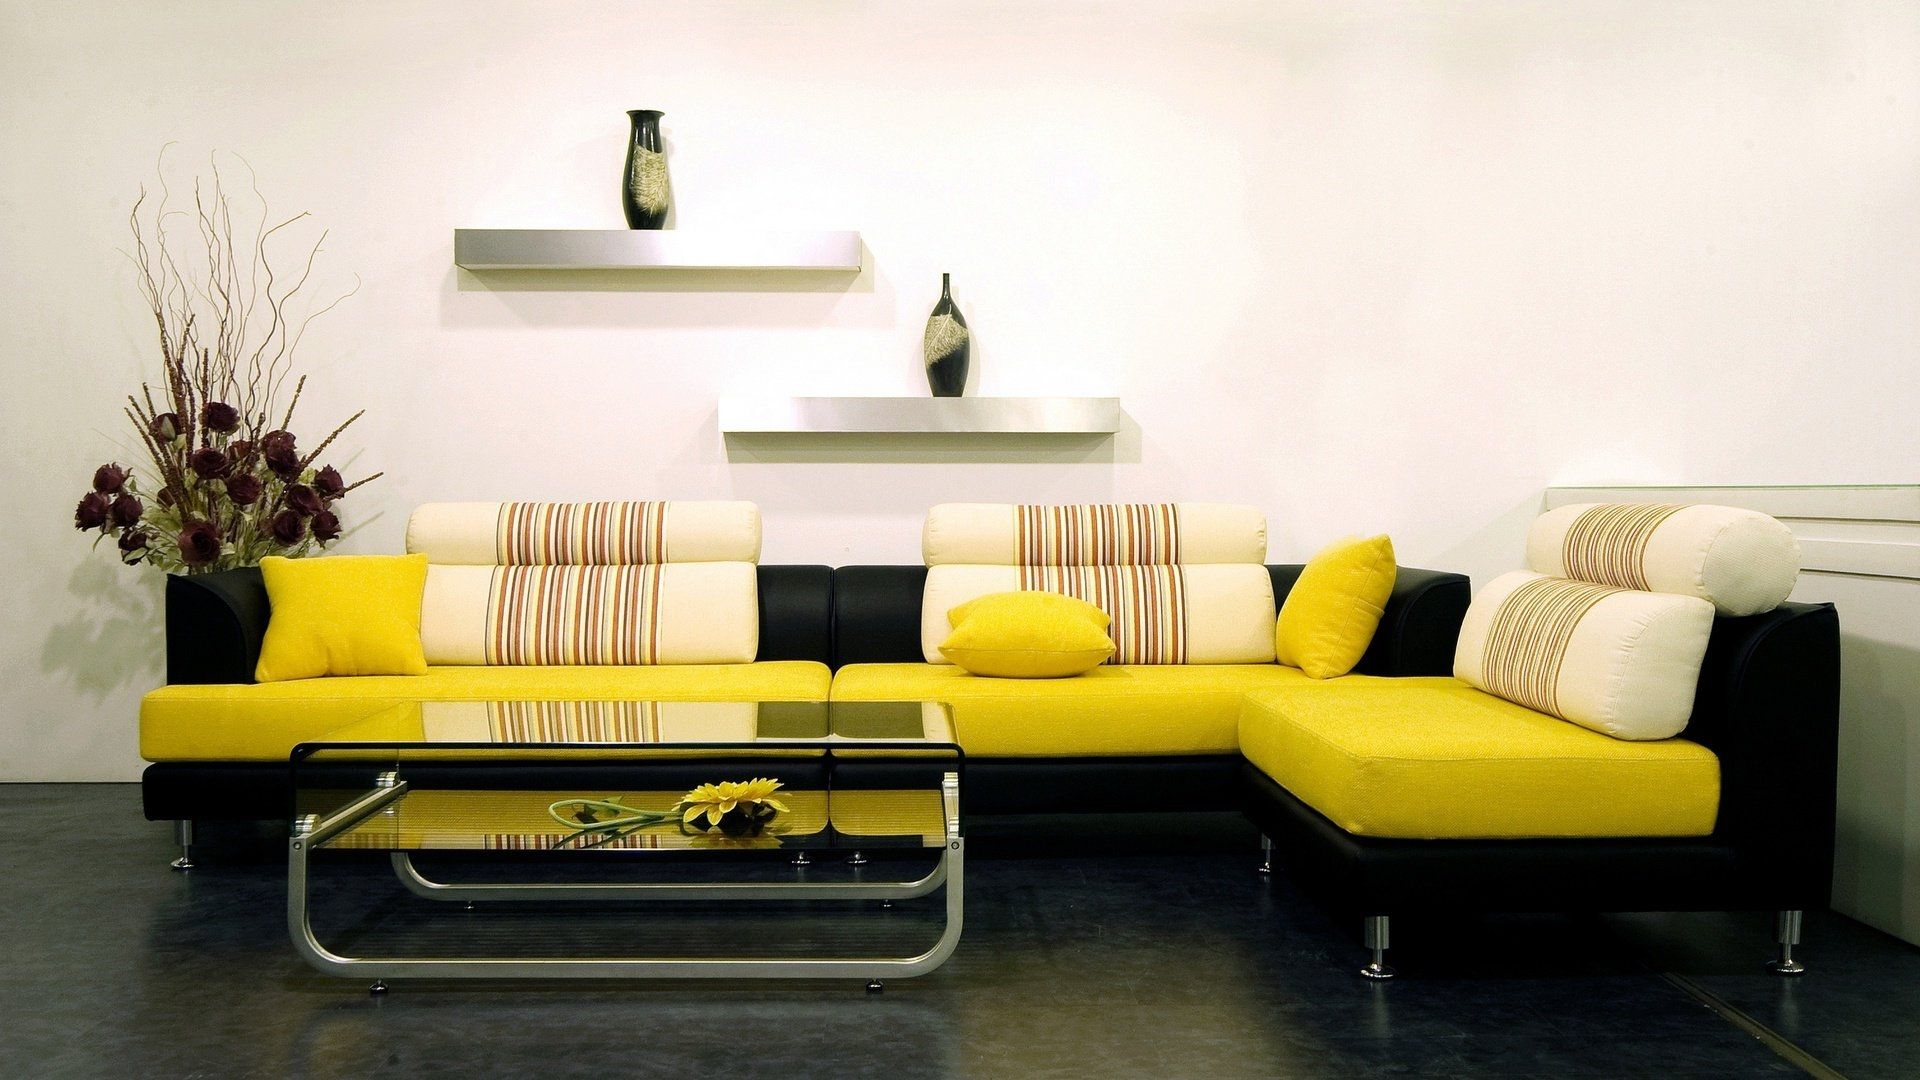 Living Room Small Living Room Beautiful Interior Design Yellow Pertaining To Yellow Sofa Chairs (View 14 of 15)